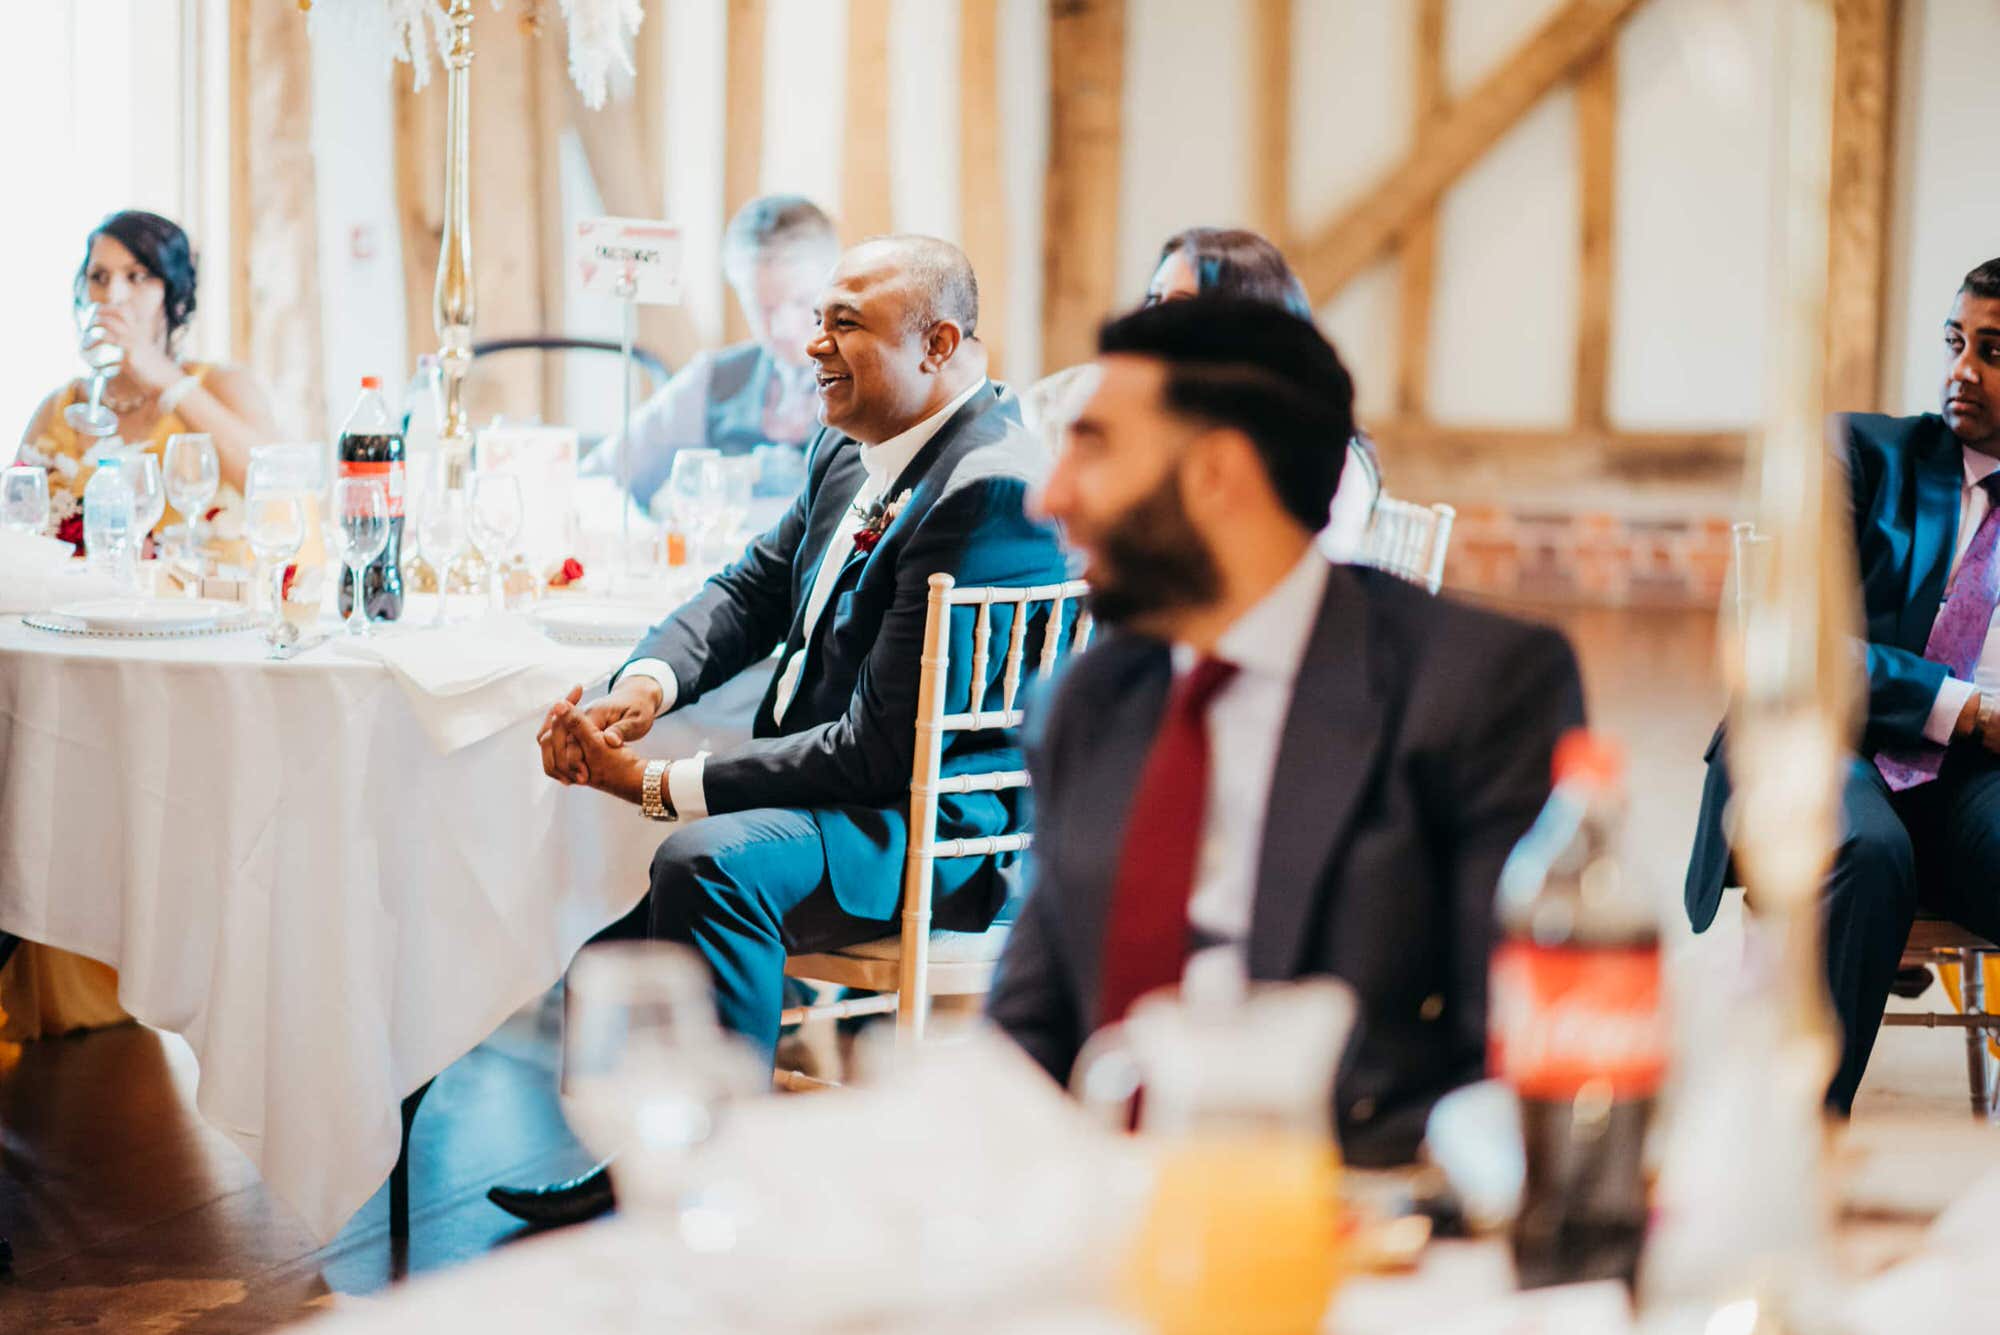 micklesfield-hall-hertfordshire-wedding-photographer-roshni-photography-guest-candid